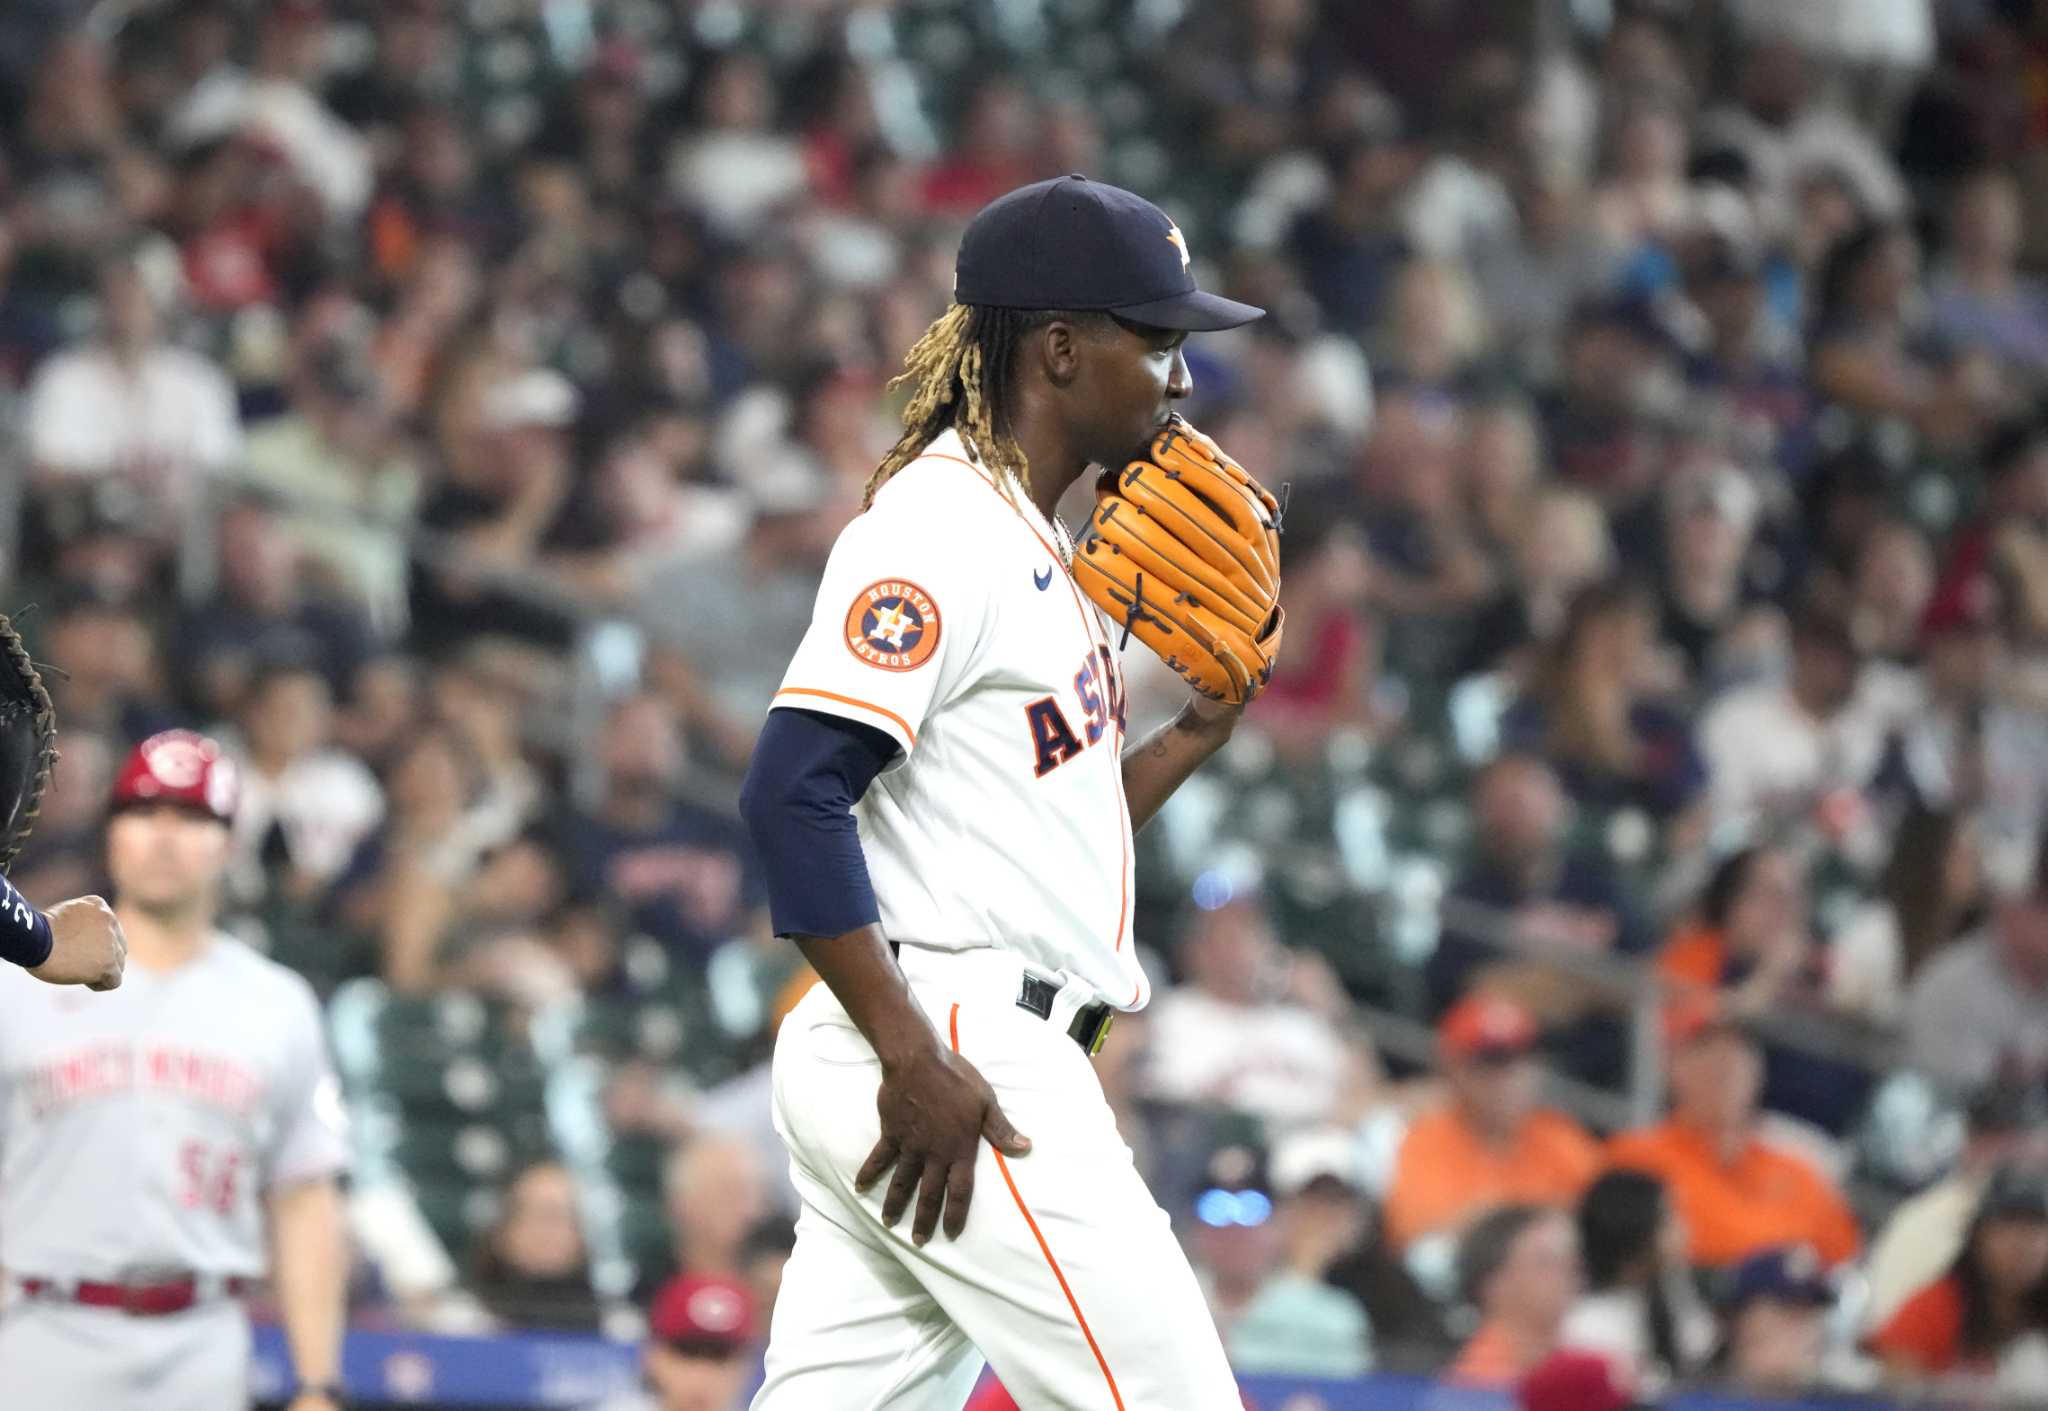 Astros reliever Rafael Montero is struggling, but his salary is not